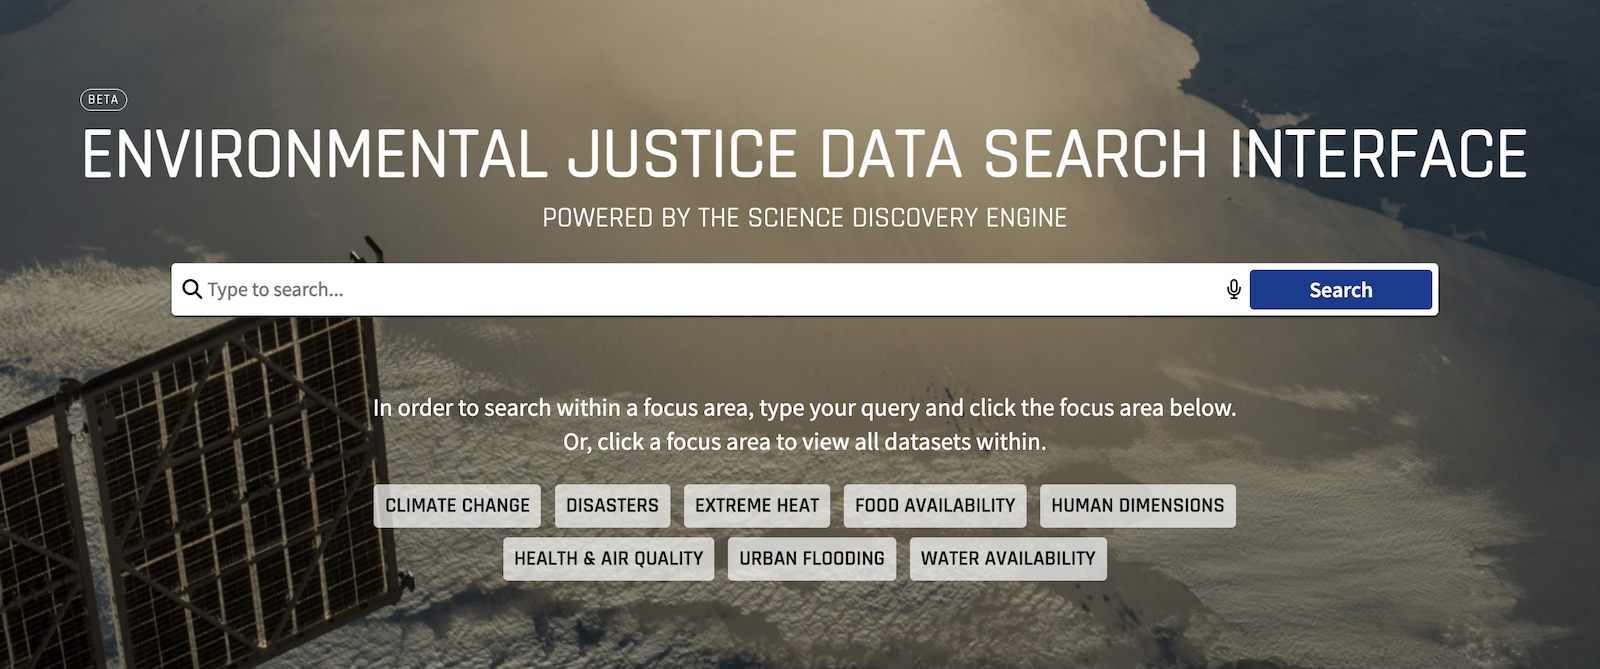 Screenshot of eJ data search interface home page with background of earth image